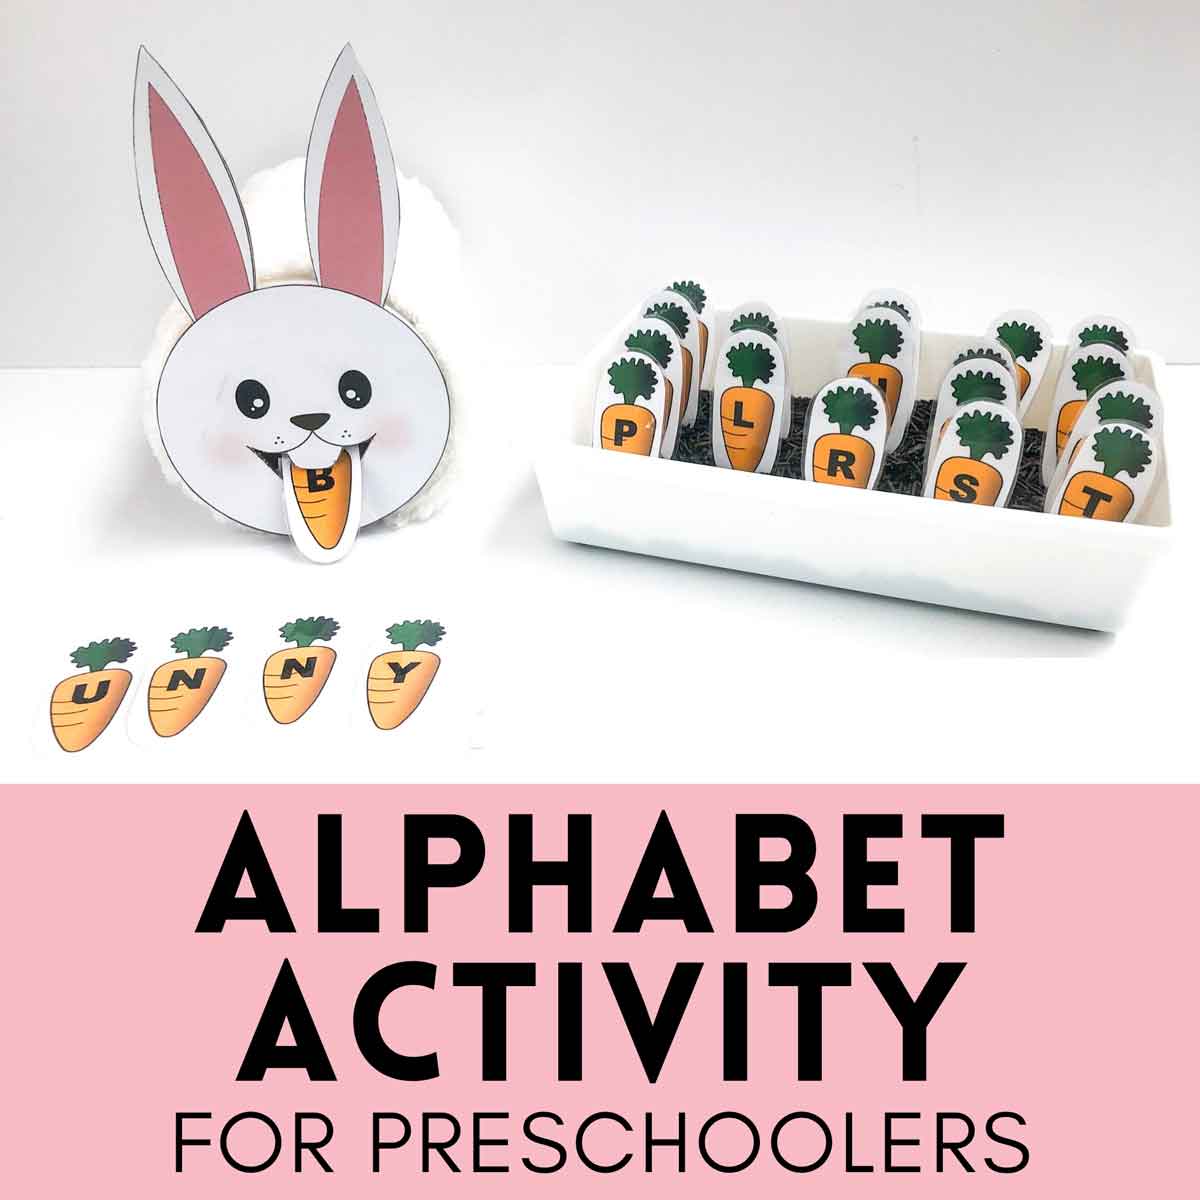 Feed the bunny activity with text overlay "Alphabet Activity for Preschoolers"